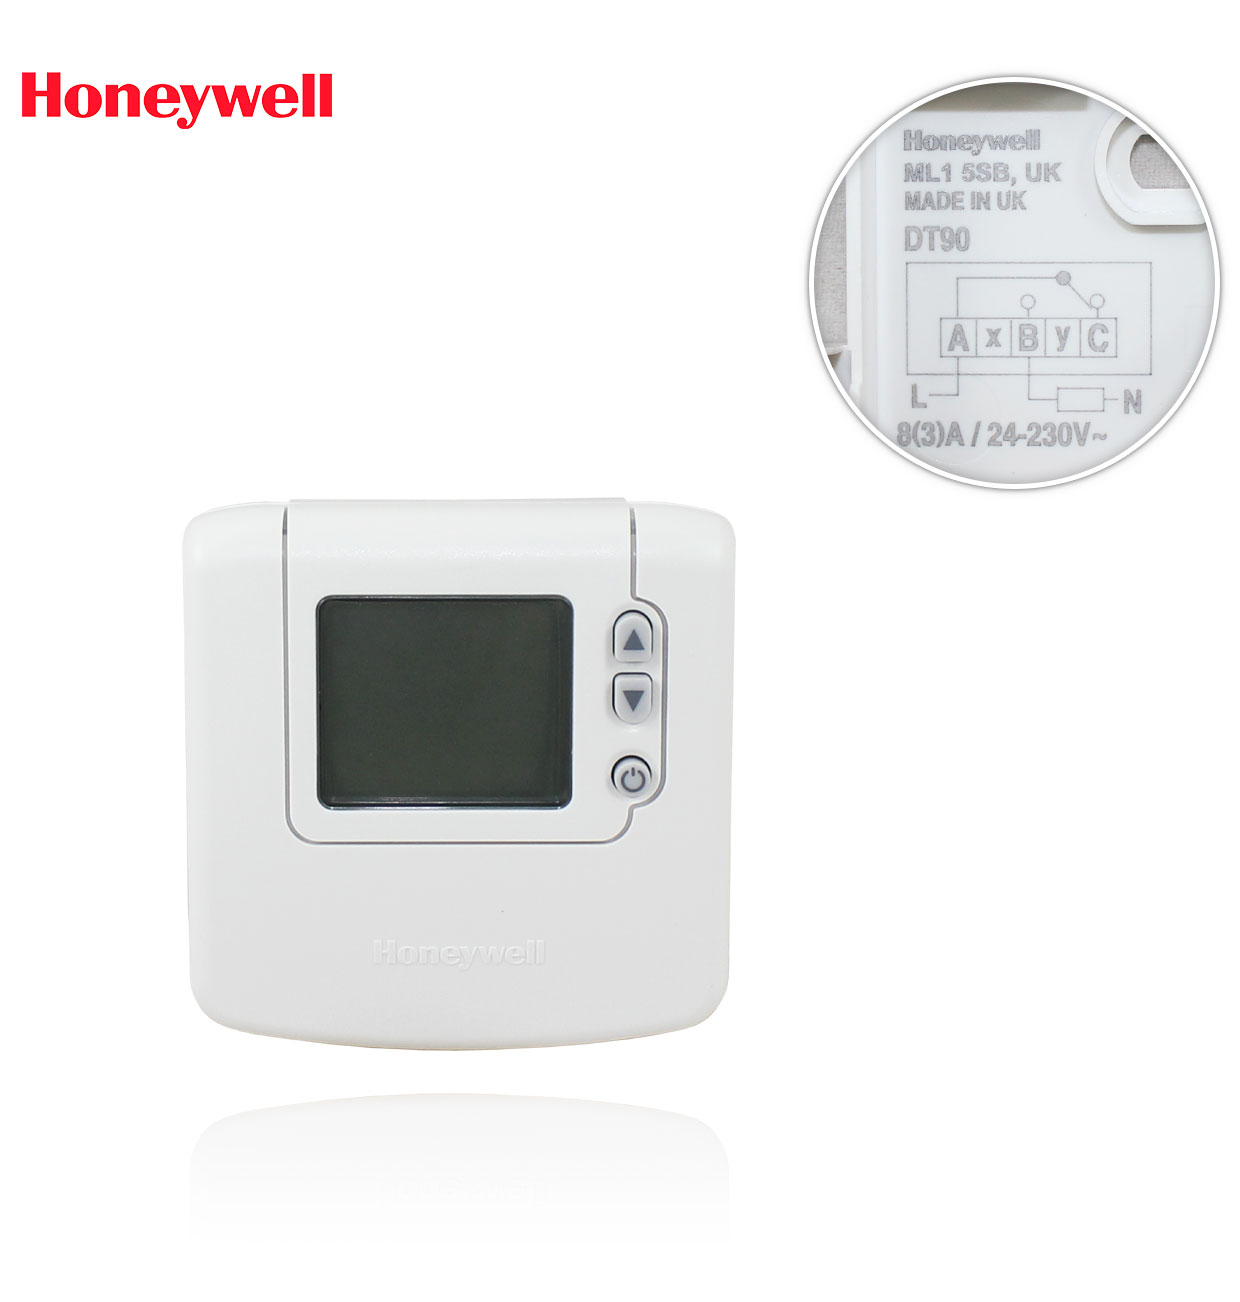 DT90 HONEYWELL DIGITAL AMBIENT THERMOSTAT